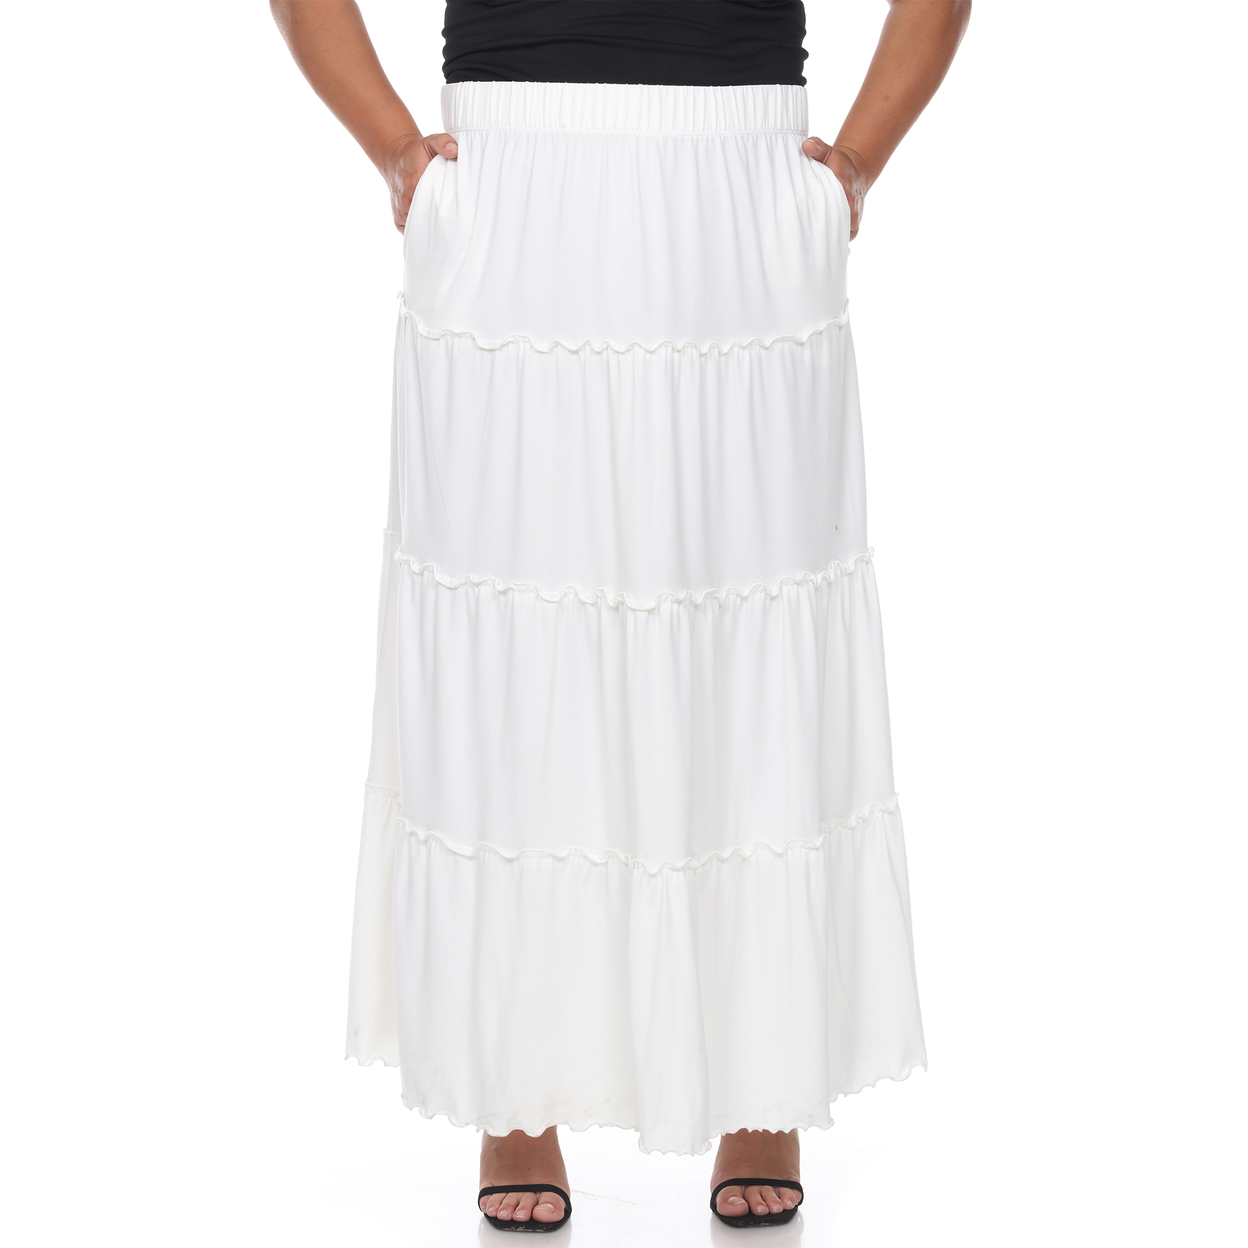 White Mark Women's Plus Size Tiered Maxi Skirt With Pockets - Black, 2x